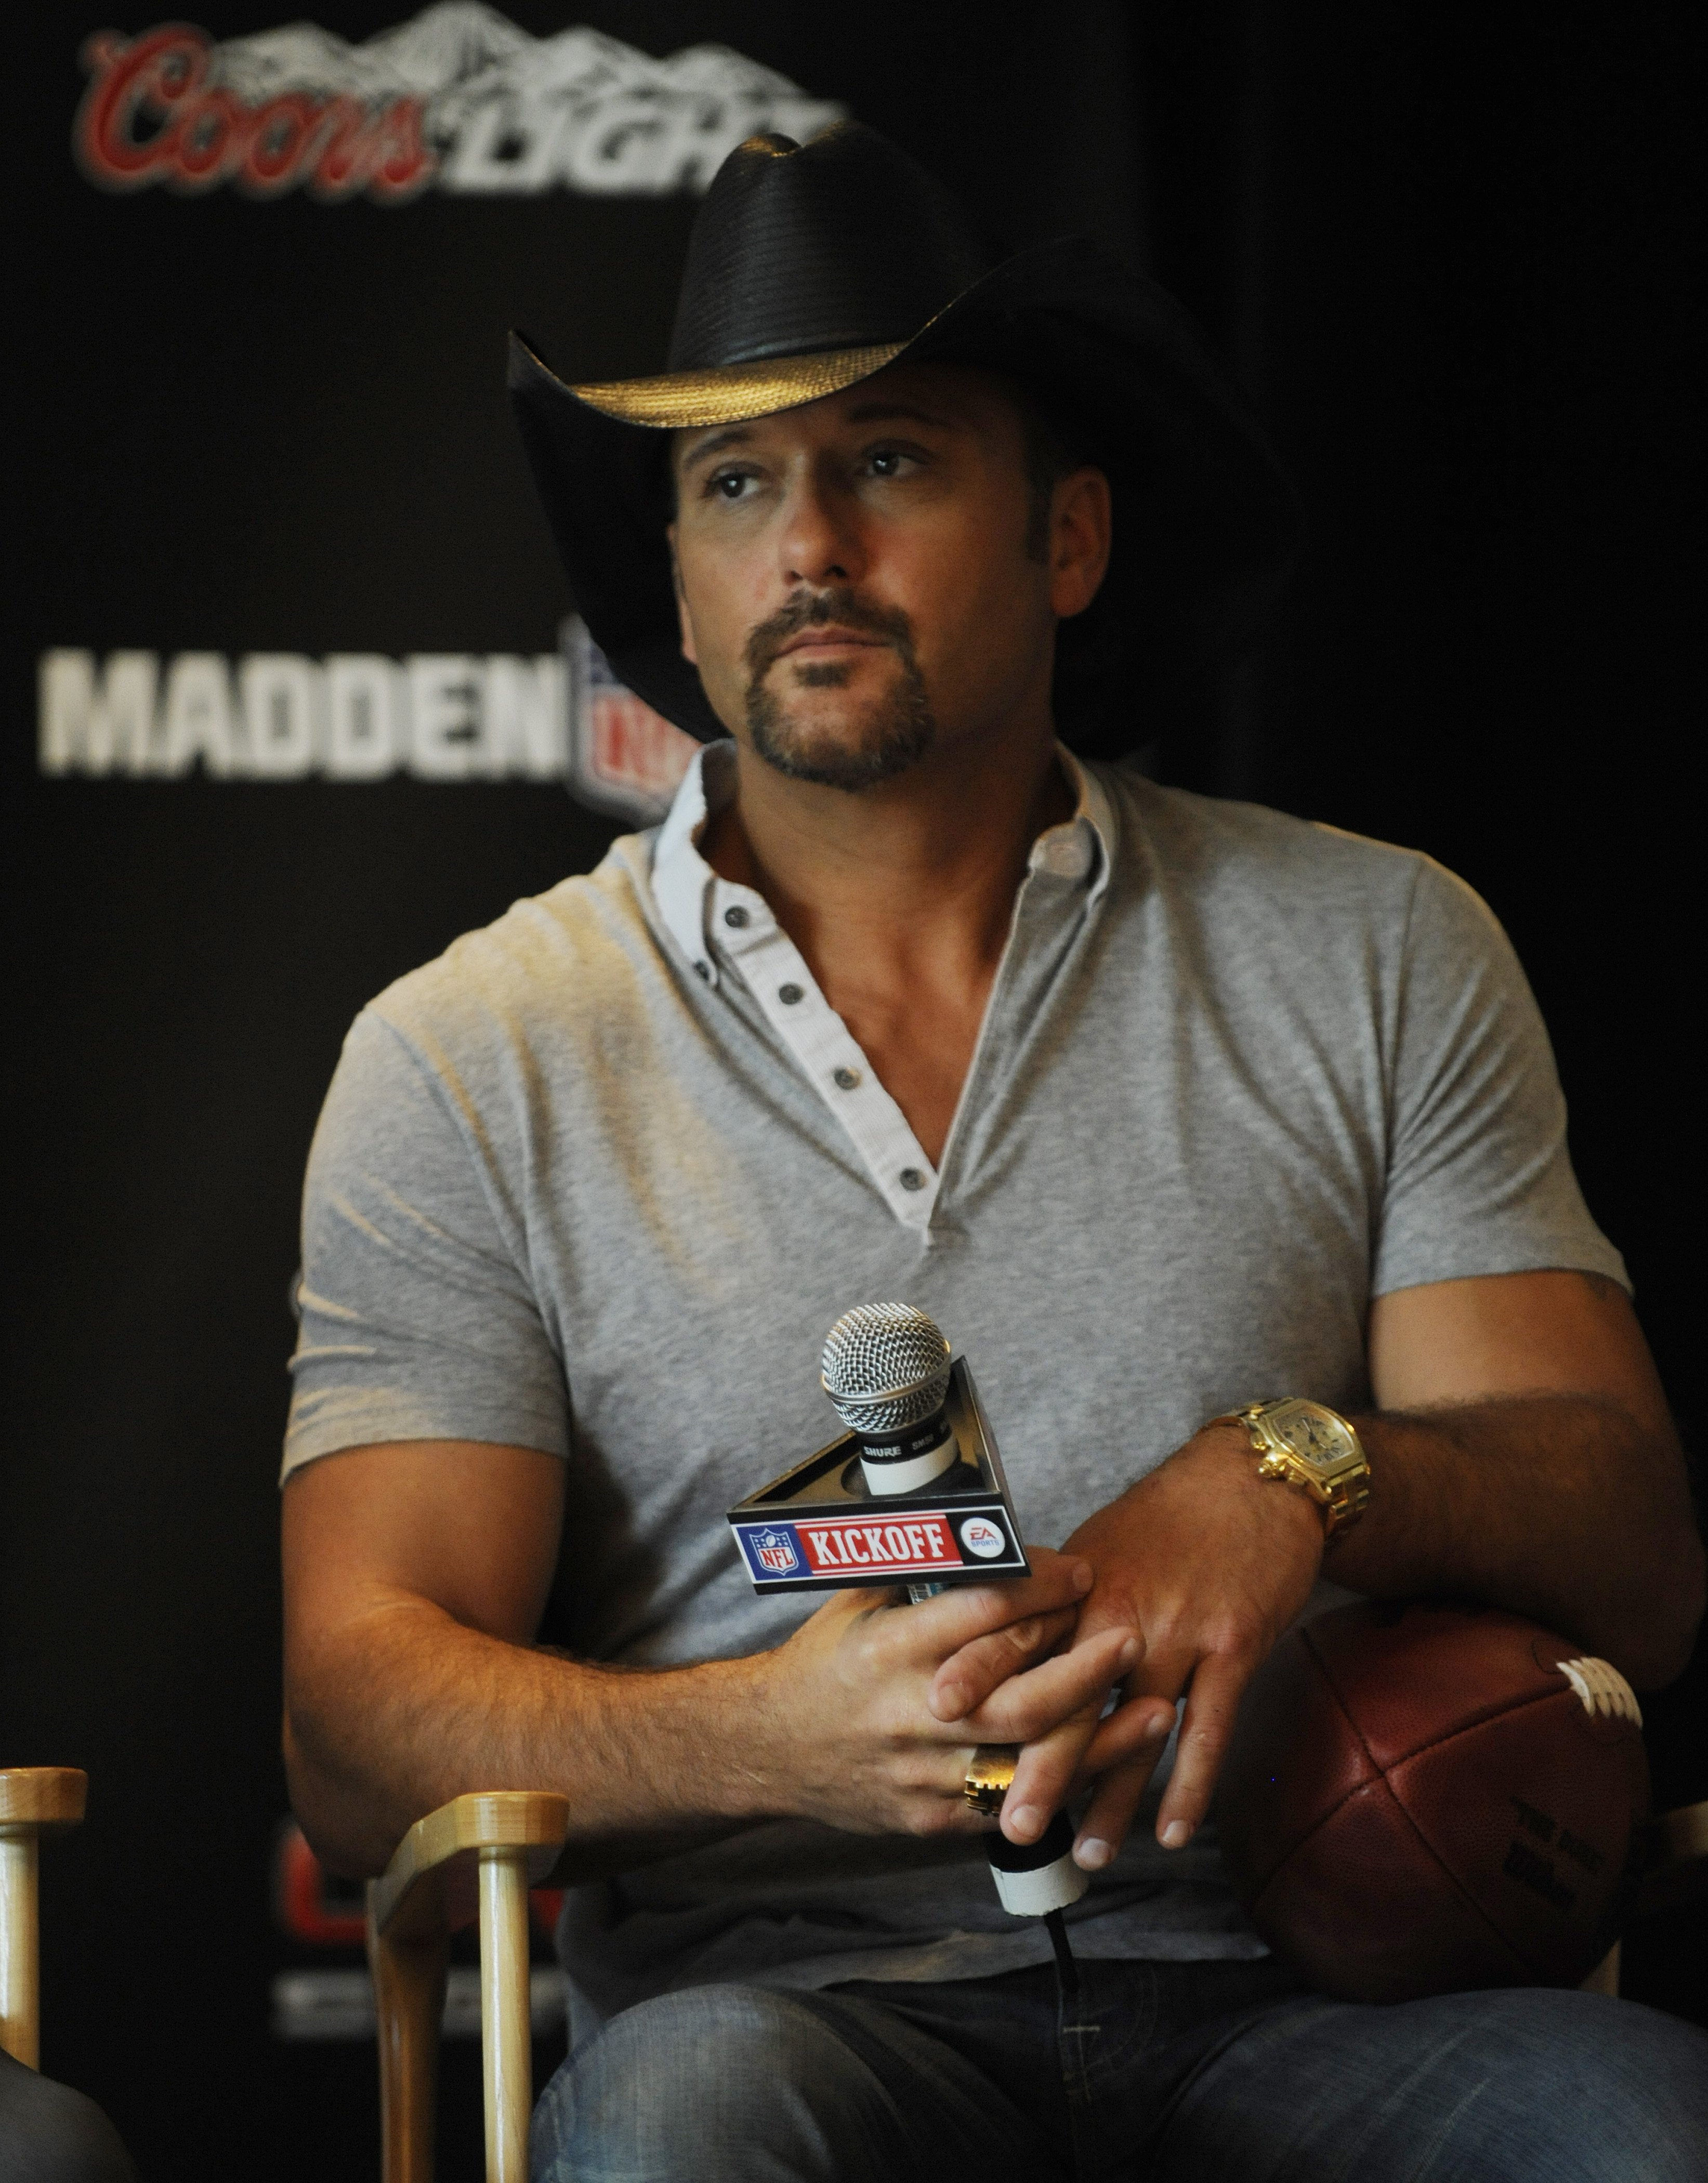 Tim McGraw at the 2009 NFL Opening Kickoff event on September 9, 2009 in Pittsburgh, Pennsylvania. | Photo: Getty Images